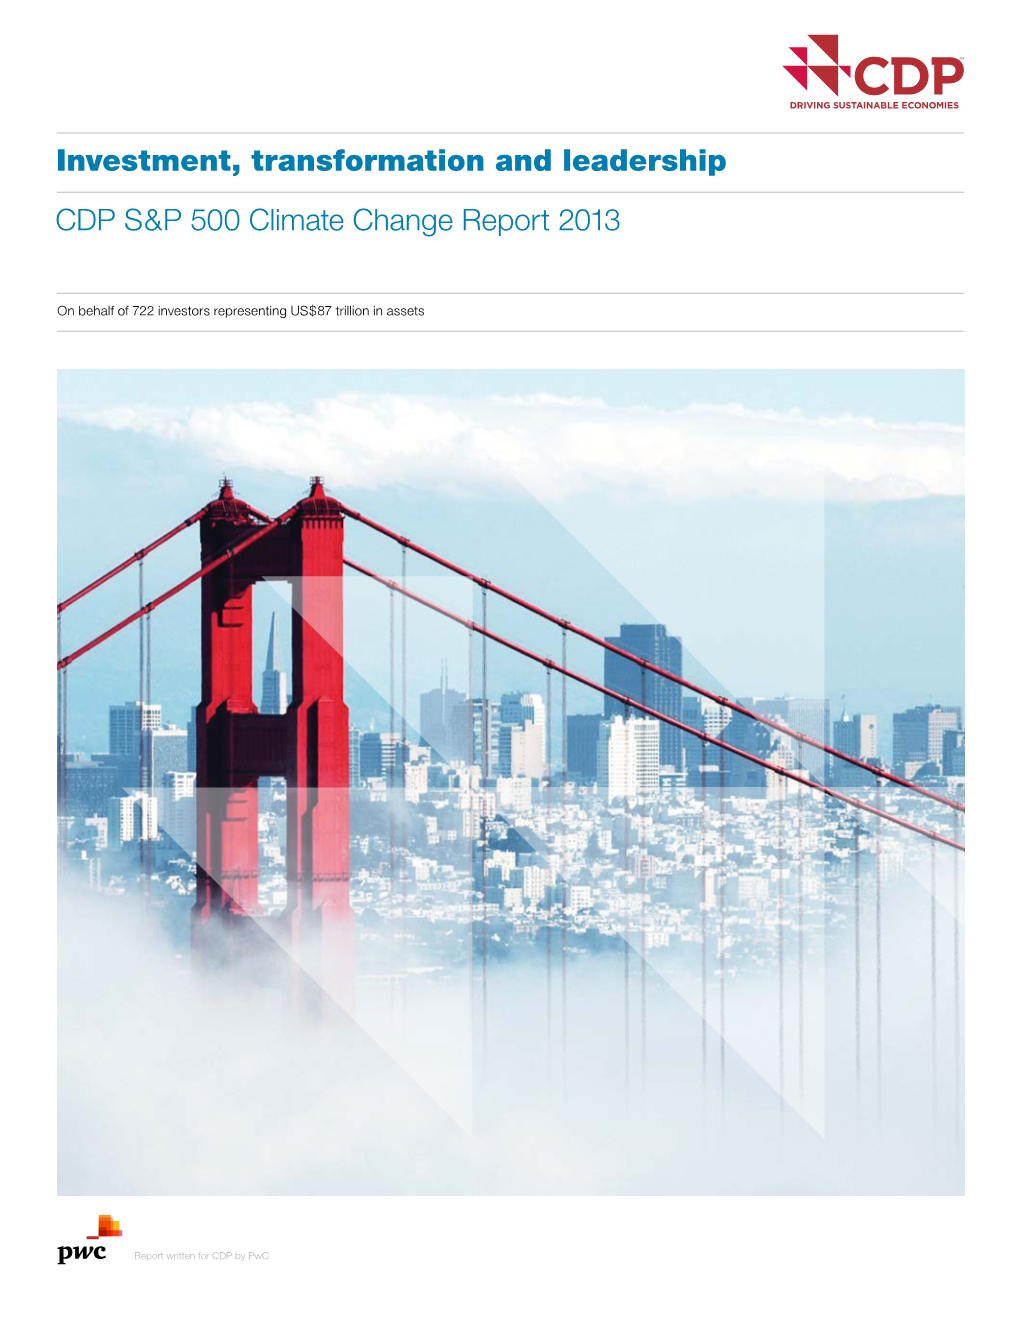 Investment, Transformation and Leadership CDP S&P 500 Climate